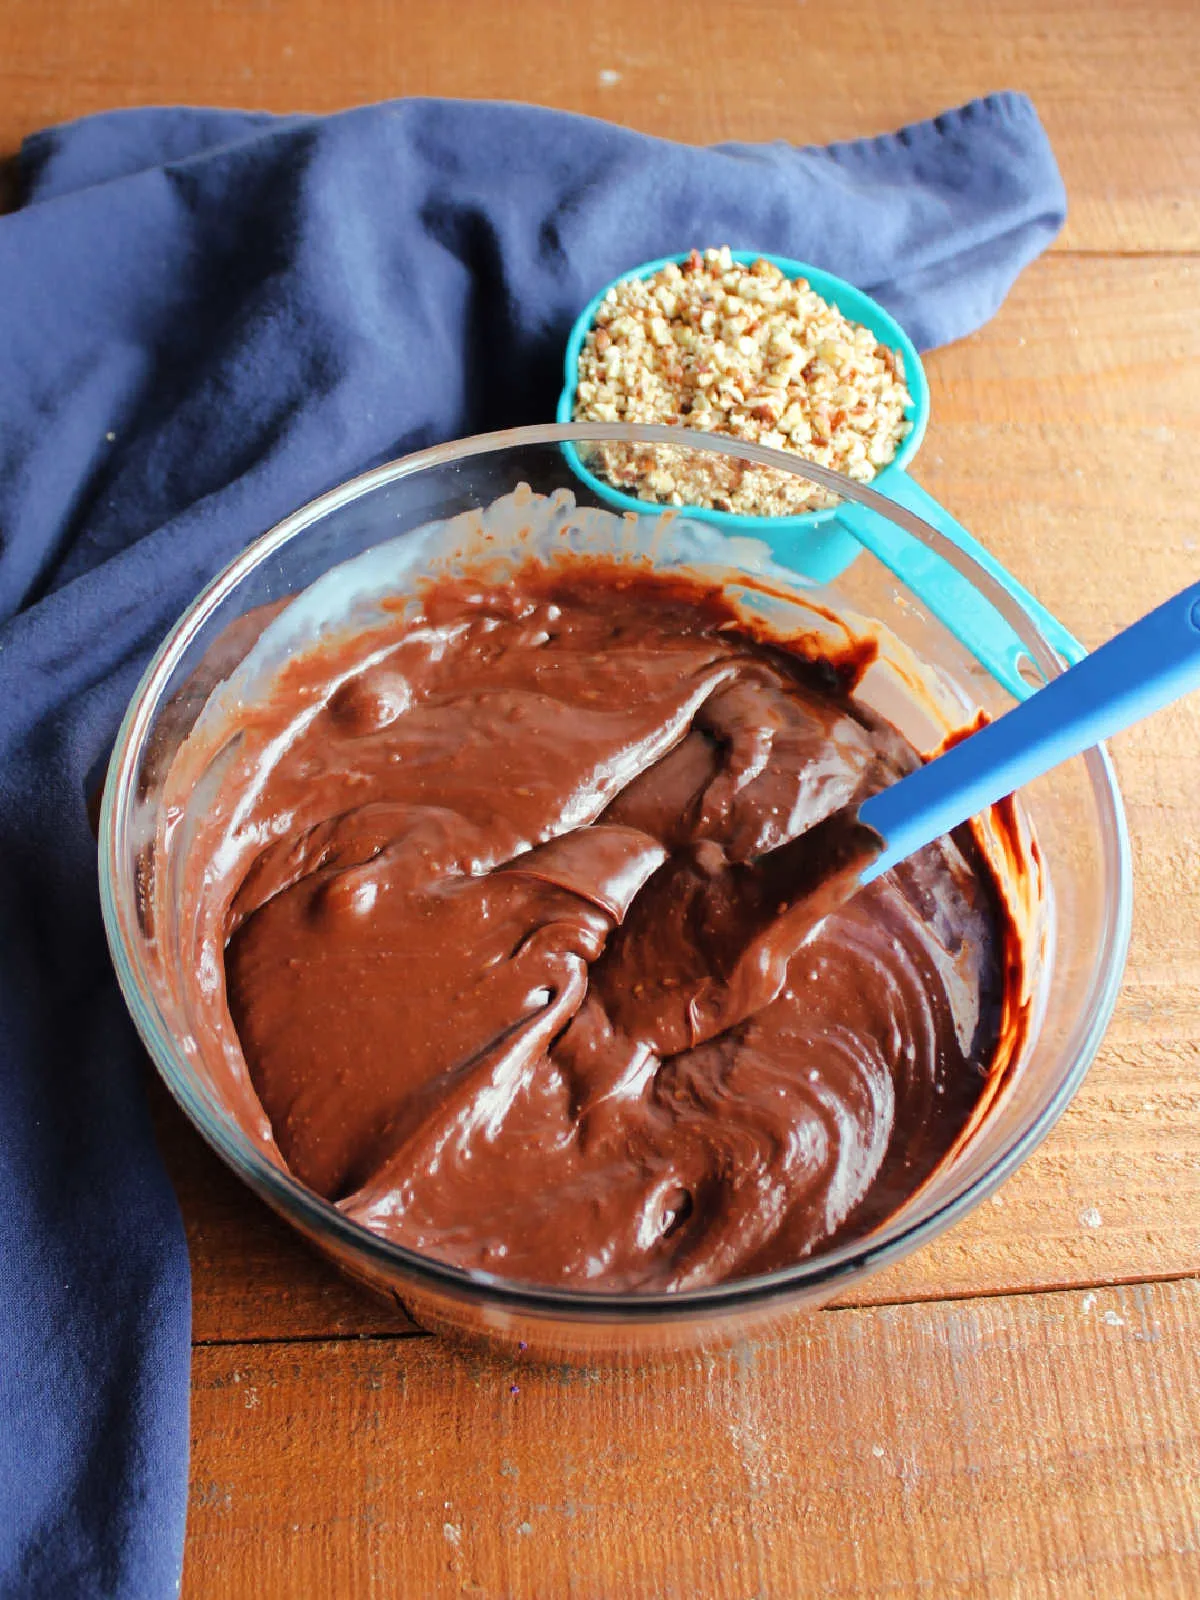 Mixing bowl with melted chocolate and condensed milk mixture inside.